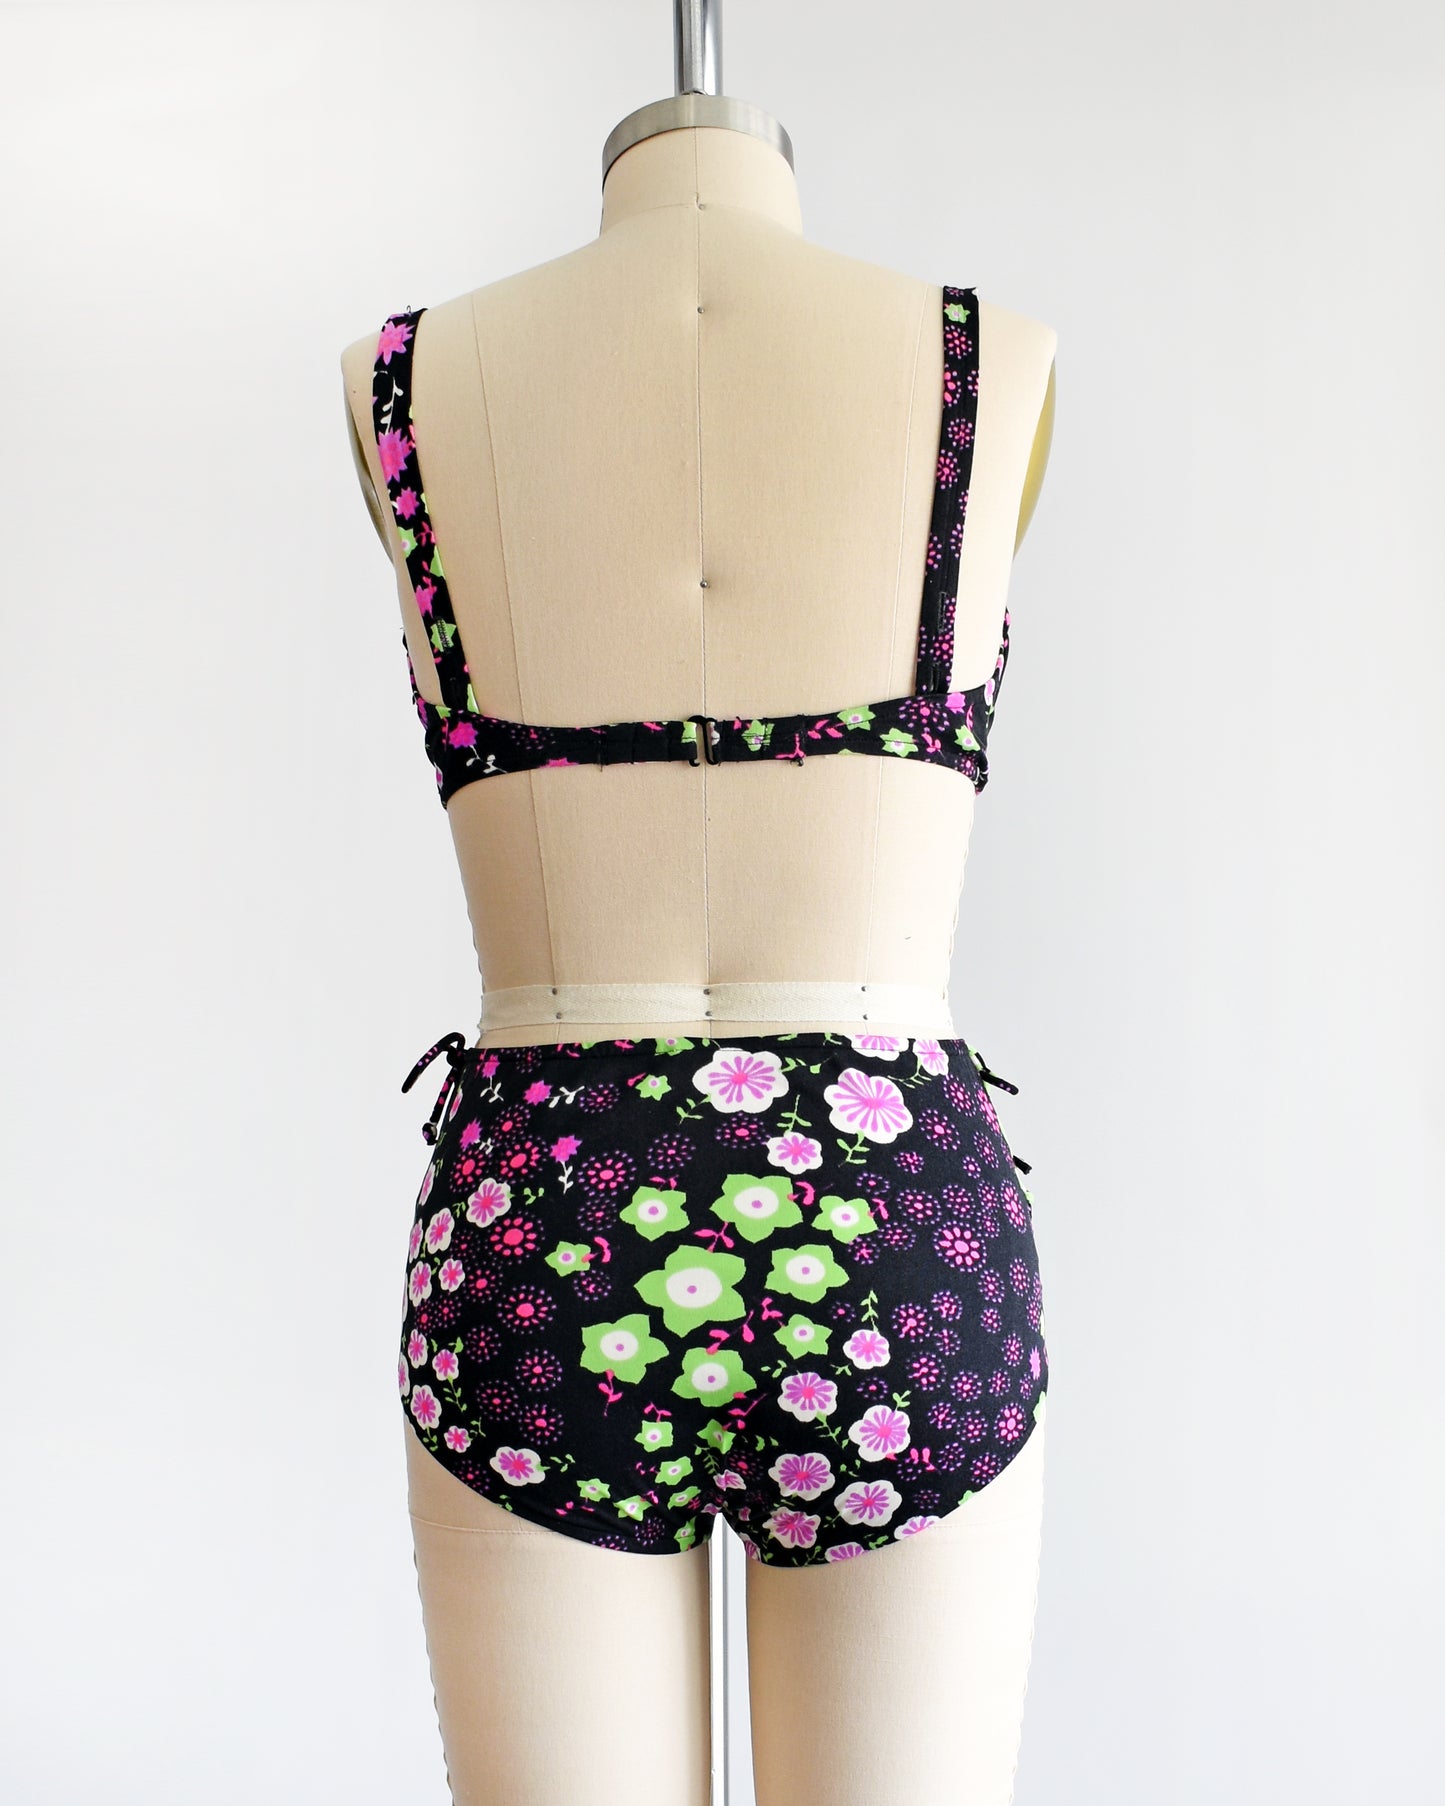 back view of a vintage 1960s two piece bikini set that is black and has a bright pink, purple, green, and white flower power print on a dress form.